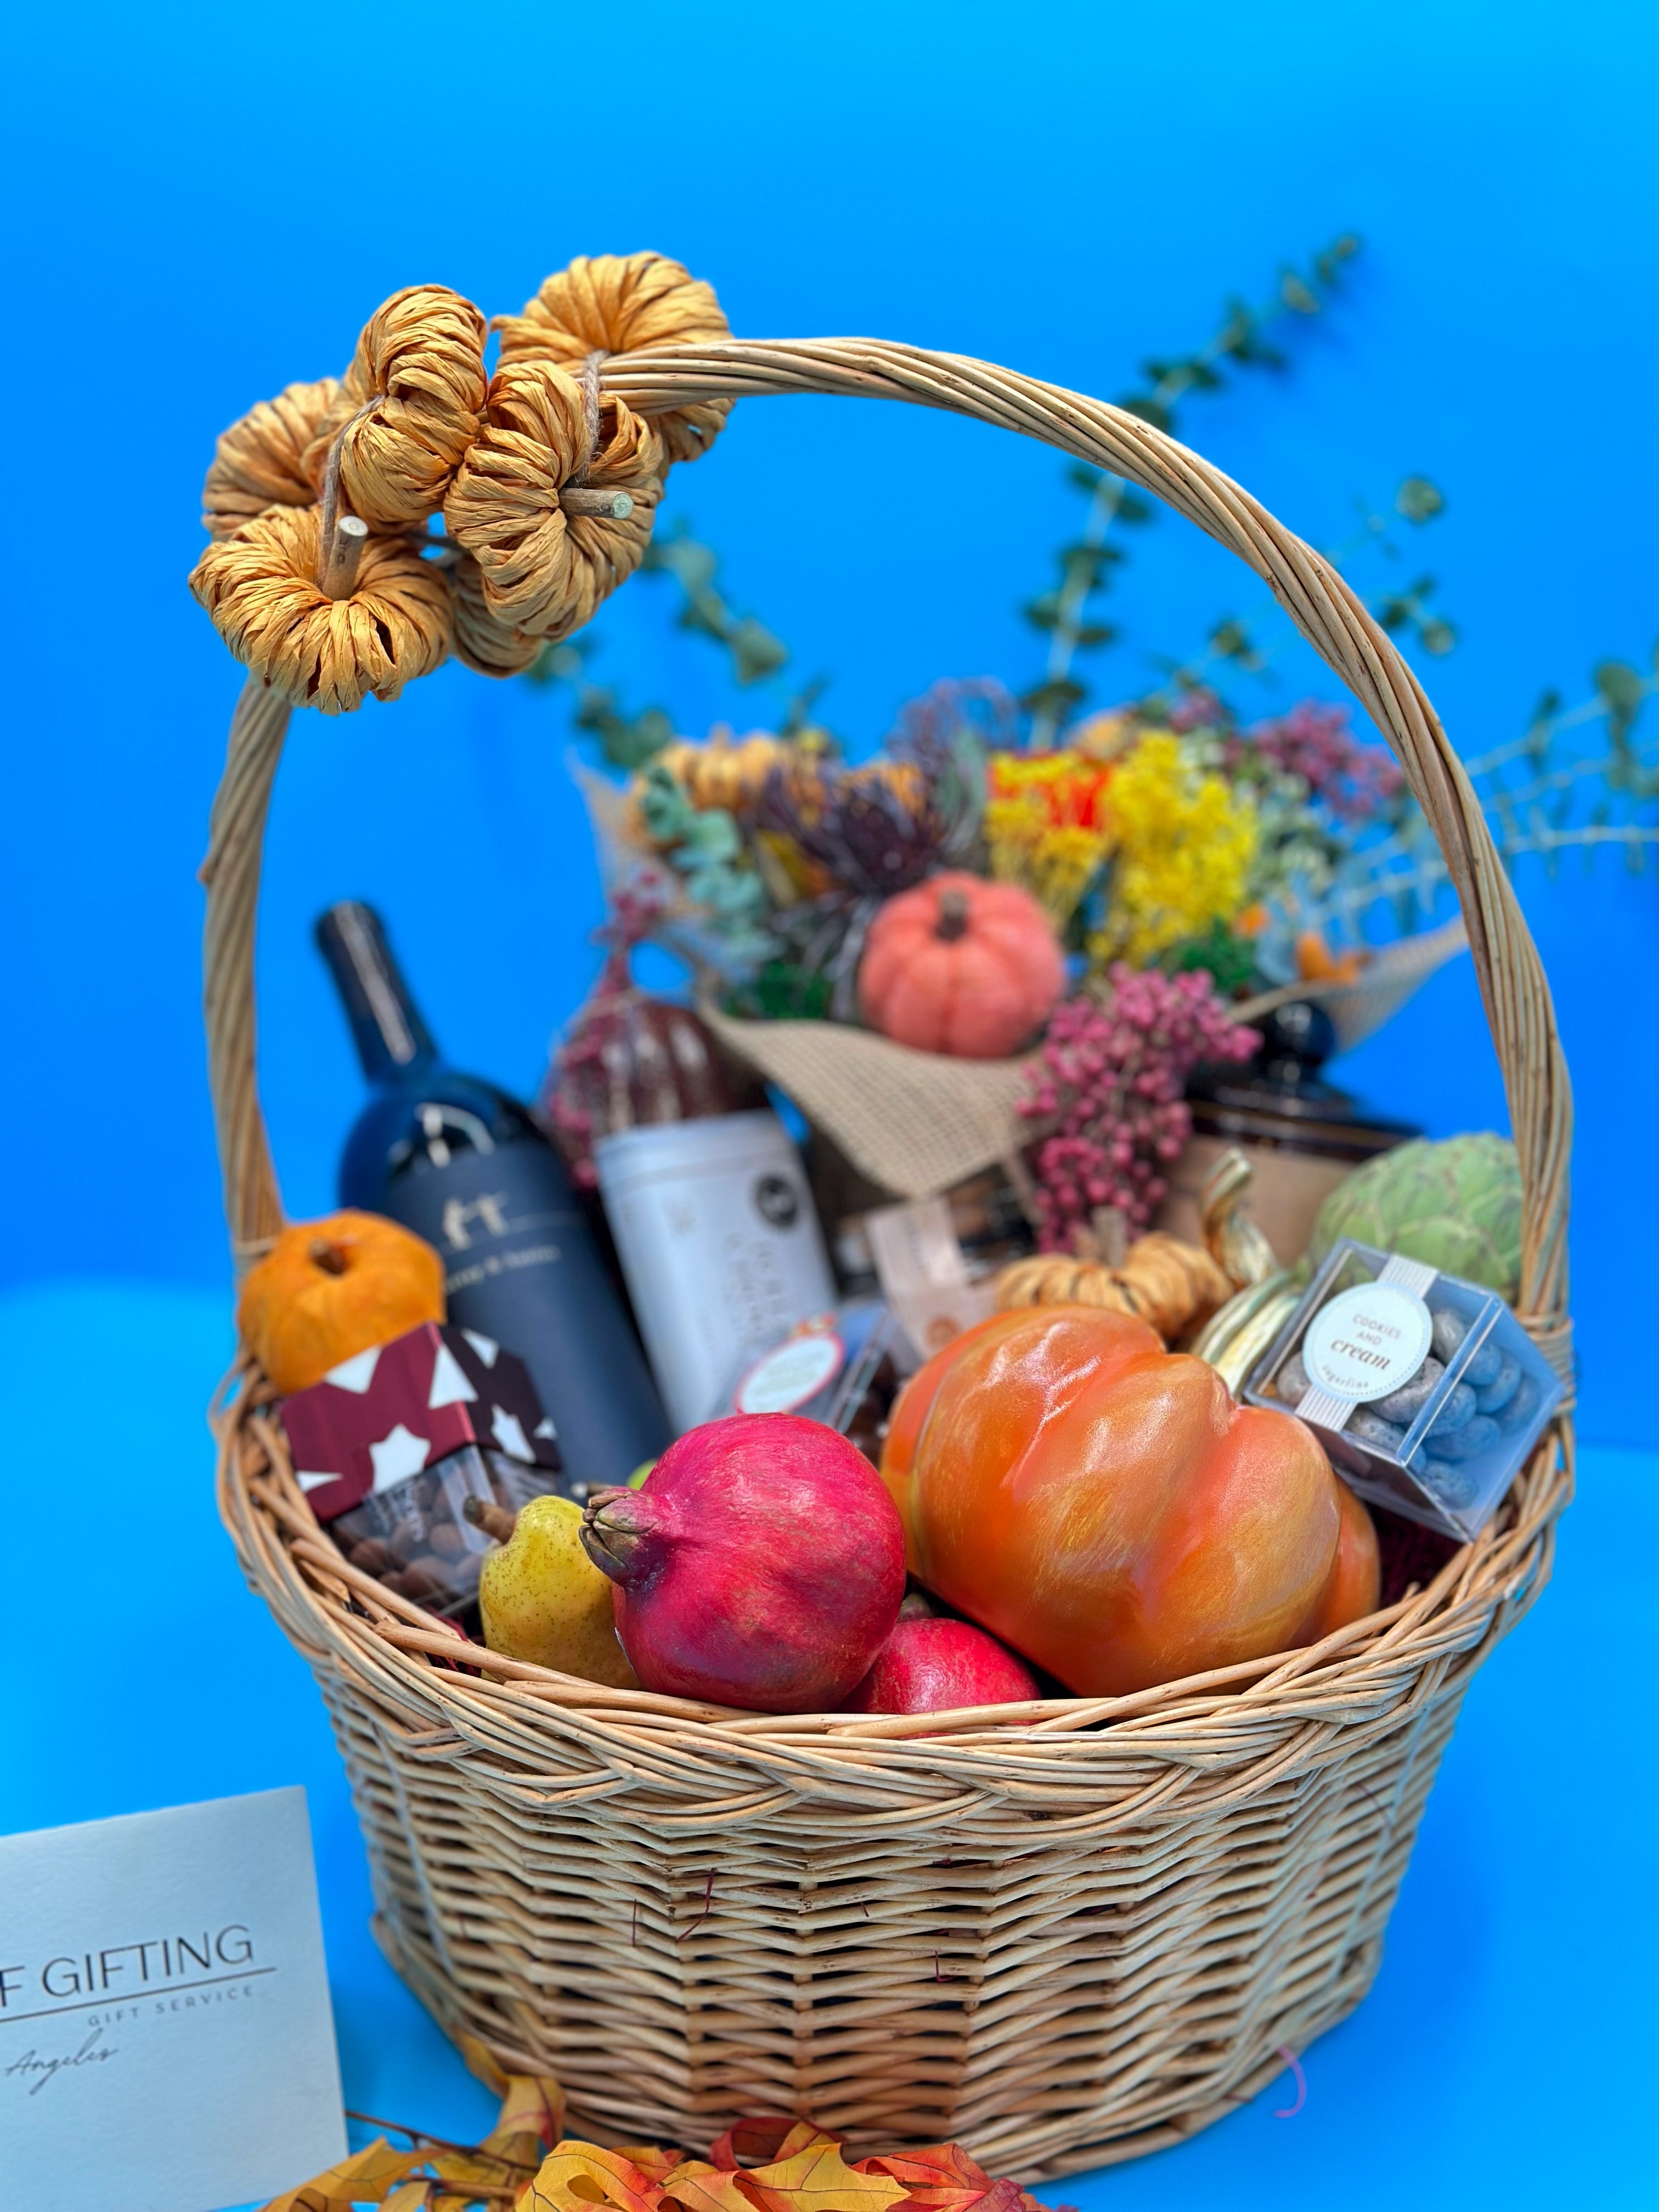 Amazon.com : Gift Basket Village Fall Festival Large Gift Basket : Gourmet  Snacks And Hors Doeuvres Gifts : Grocery & Gourmet Food